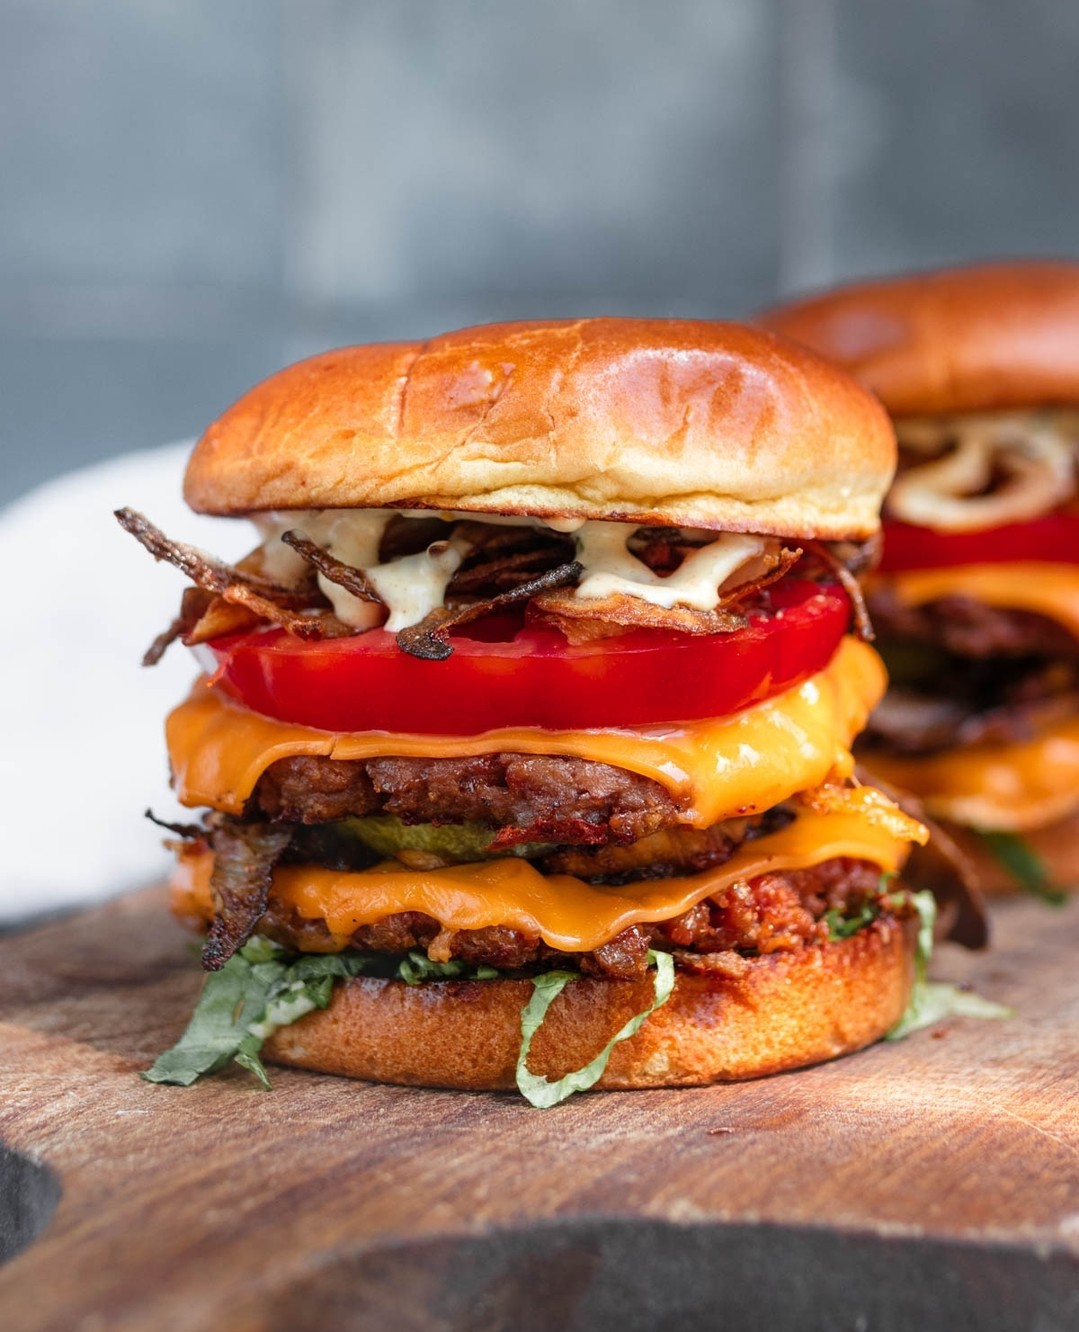 Slow your scroll, you're going to want to save this recipe. 📌 ⁠
⁠
Just because we're vegan doesn't mean we don't love a delicious burger. Double stacked and packed with flavour – this may be the Ultimate Vegan Burger! Featuring a double stacked patties with vegan cheese, crispy onions, sautéed mushrooms, a special burger sauce, and more. 😍⁠
⁠
Get the full recipe at LINK IN BIO 👆 or at www.twomarketgirls.com